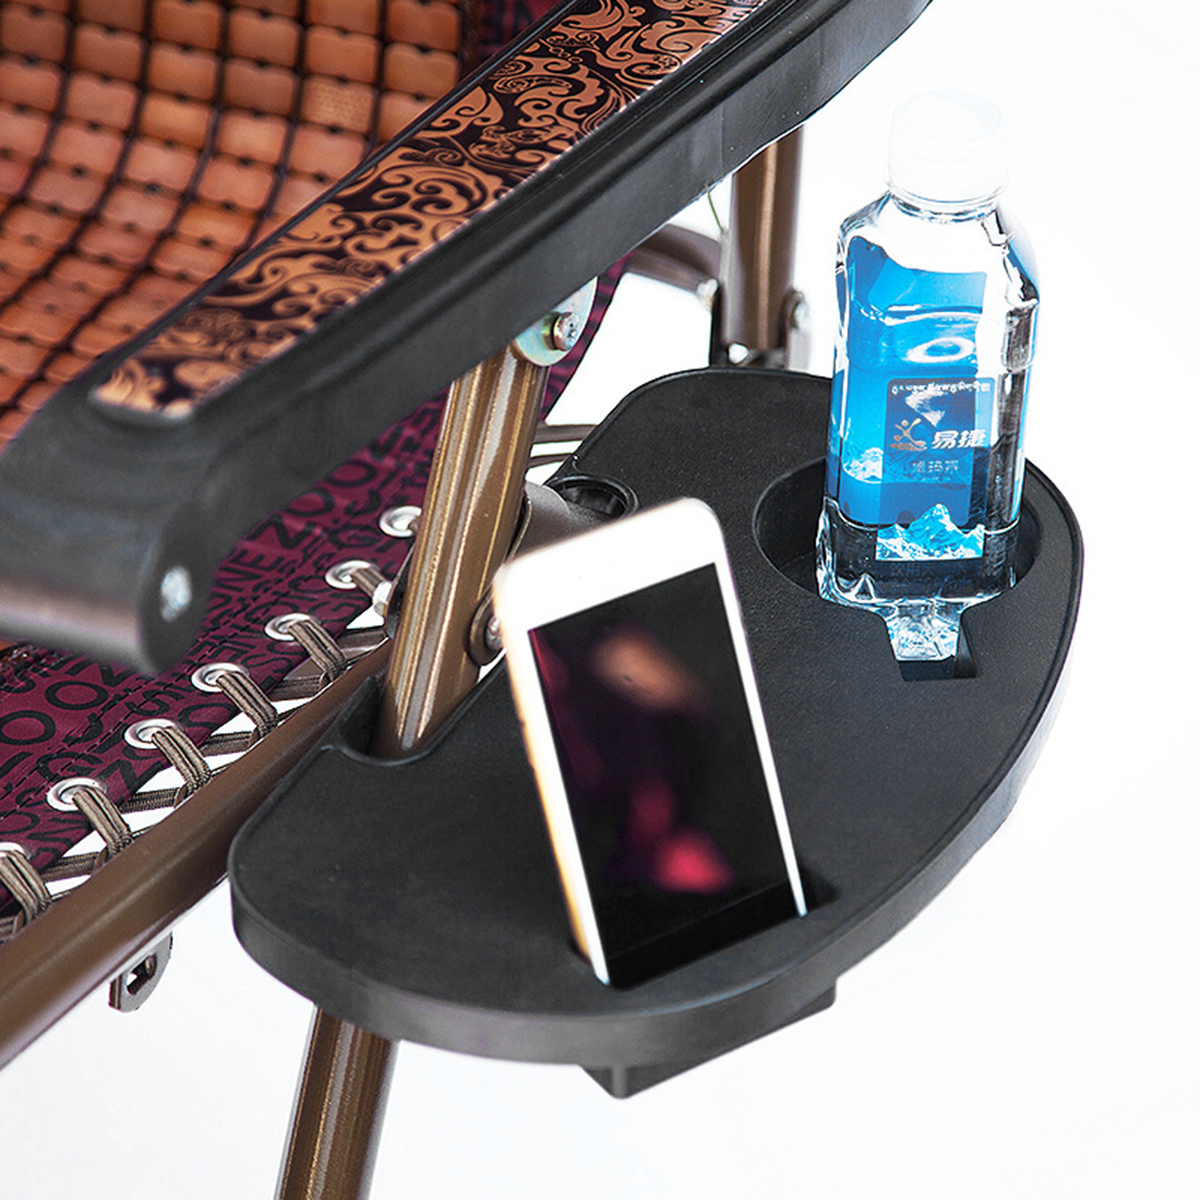 Folding-Chair-Table-Side-Tray-Multi-functional-Drink-Cup-Water-Bottle-Holder-Phone-Rack-1694964-6